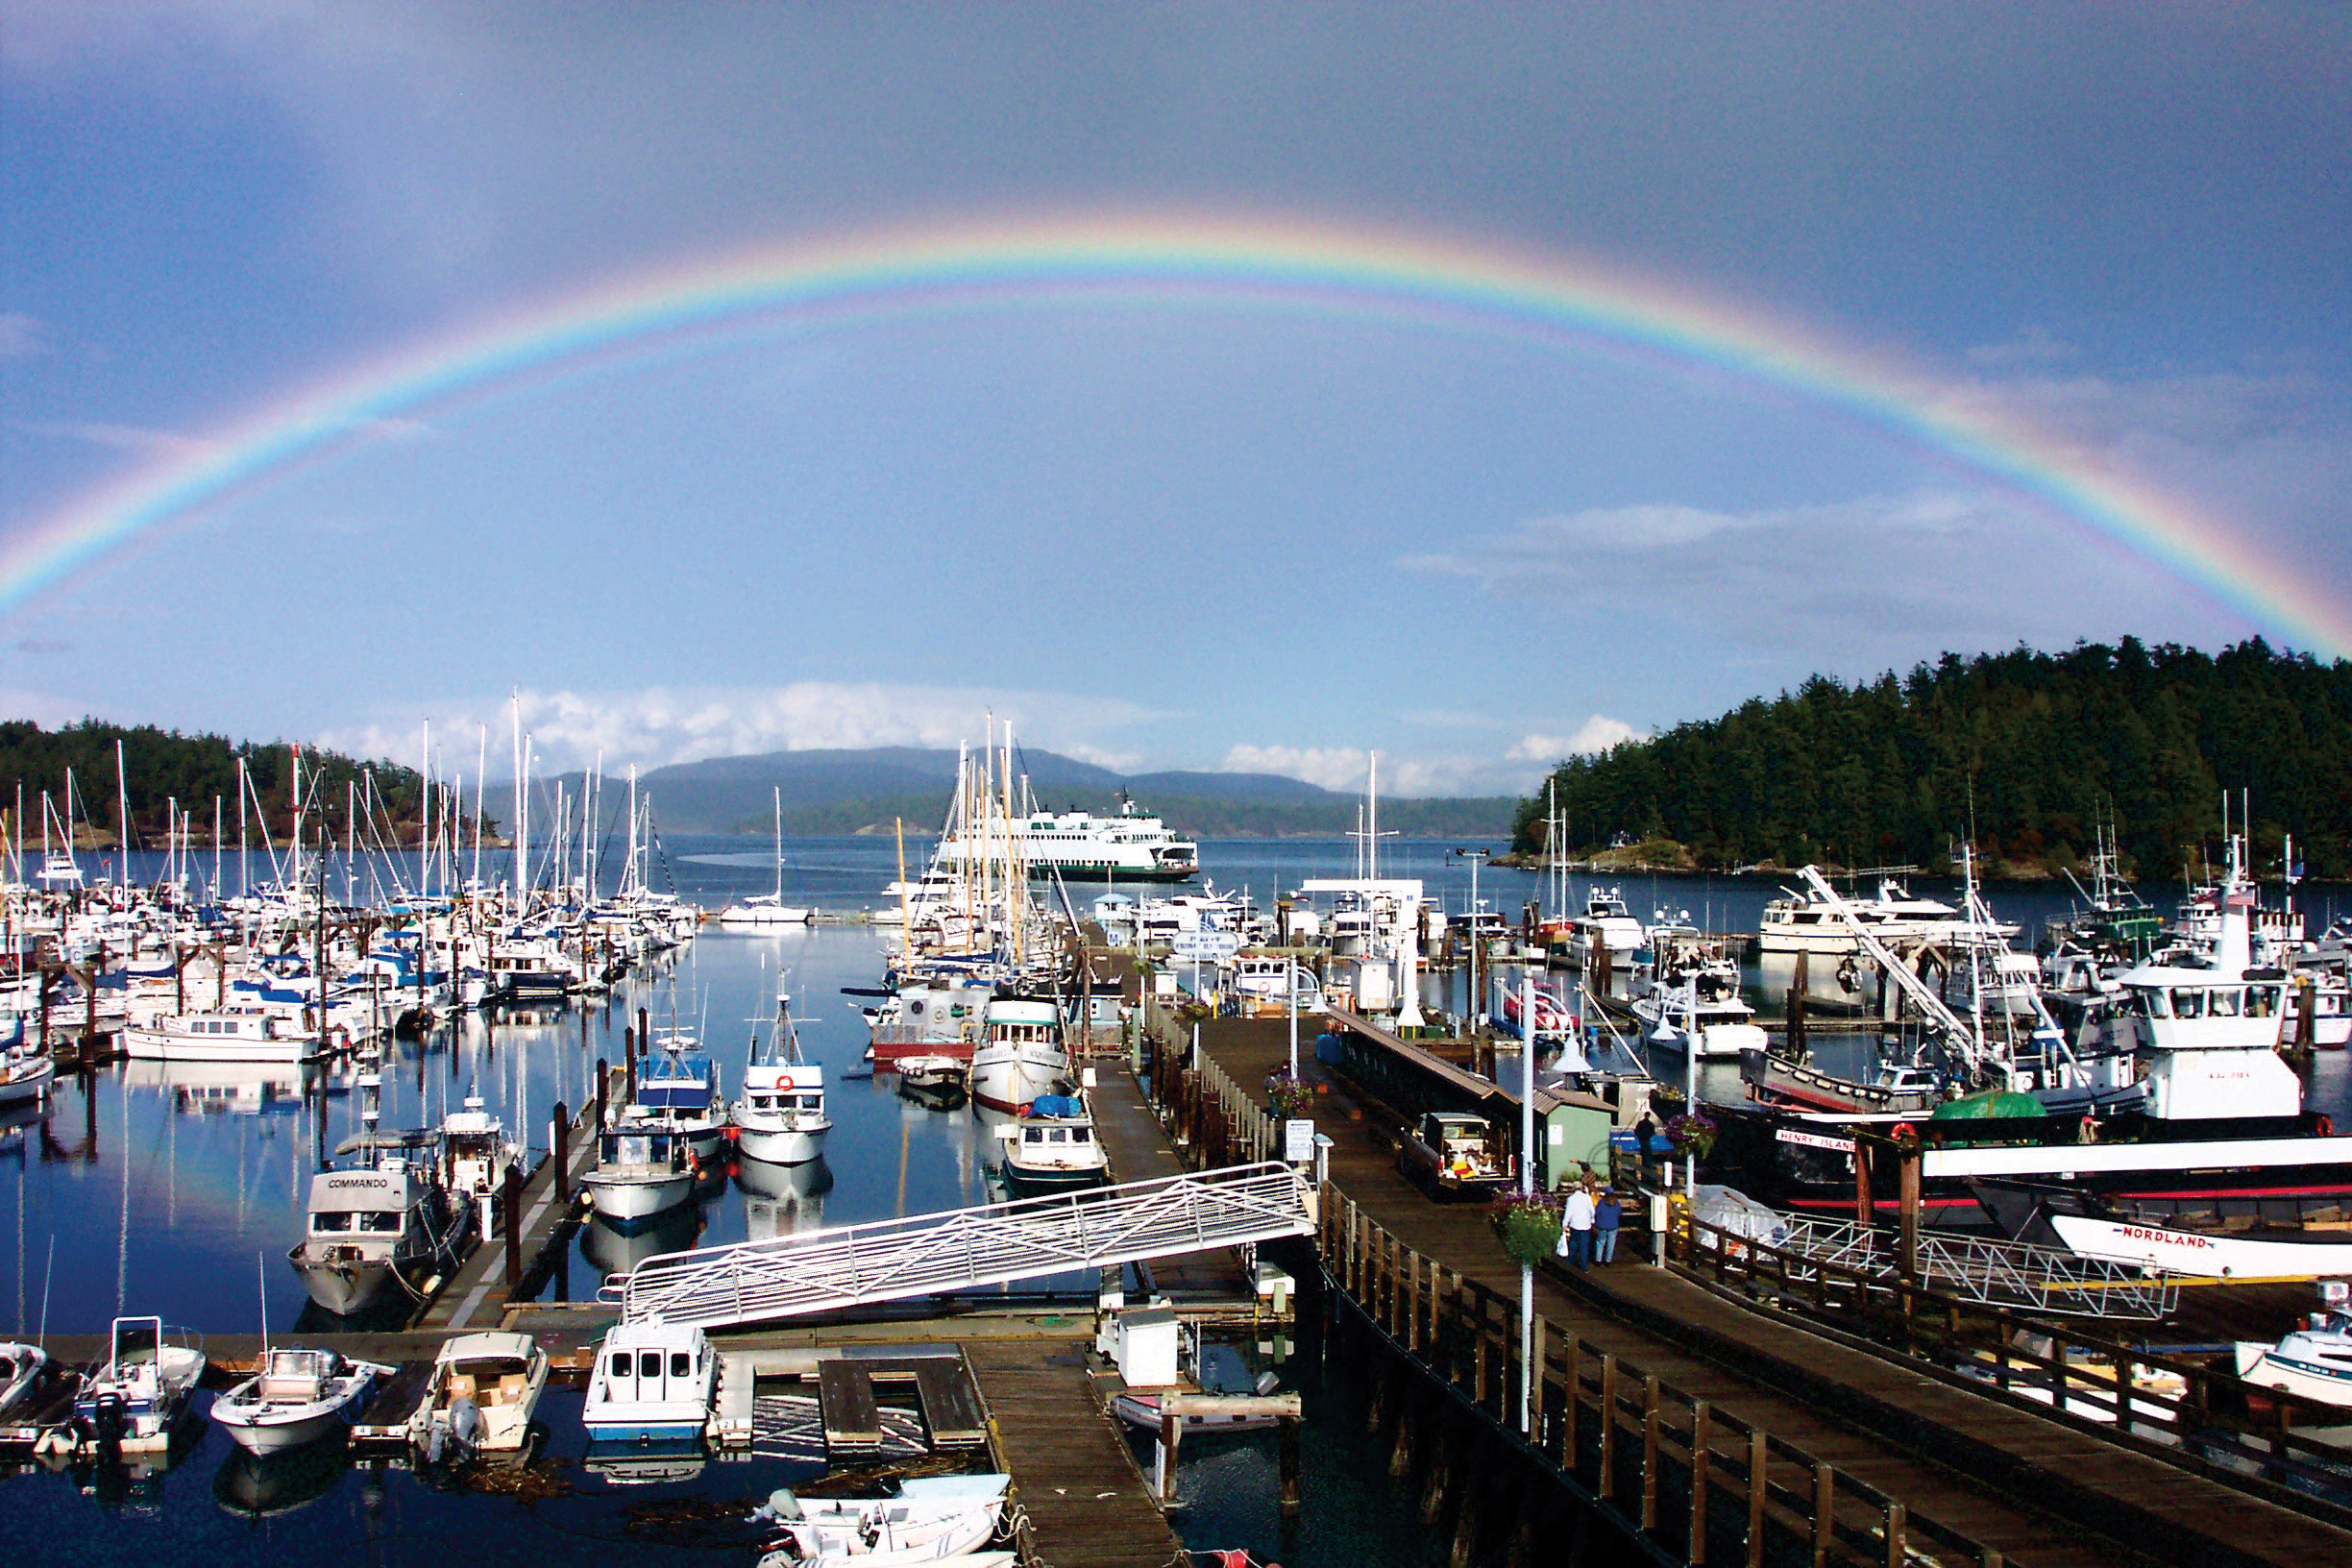 A rainbow arcs over Friday Harbor, on San Juan Island. Walk here from the airport to shop, dine, or board a whale watching tour. Photo courtesy San Juan Islands Visitors Bureau.